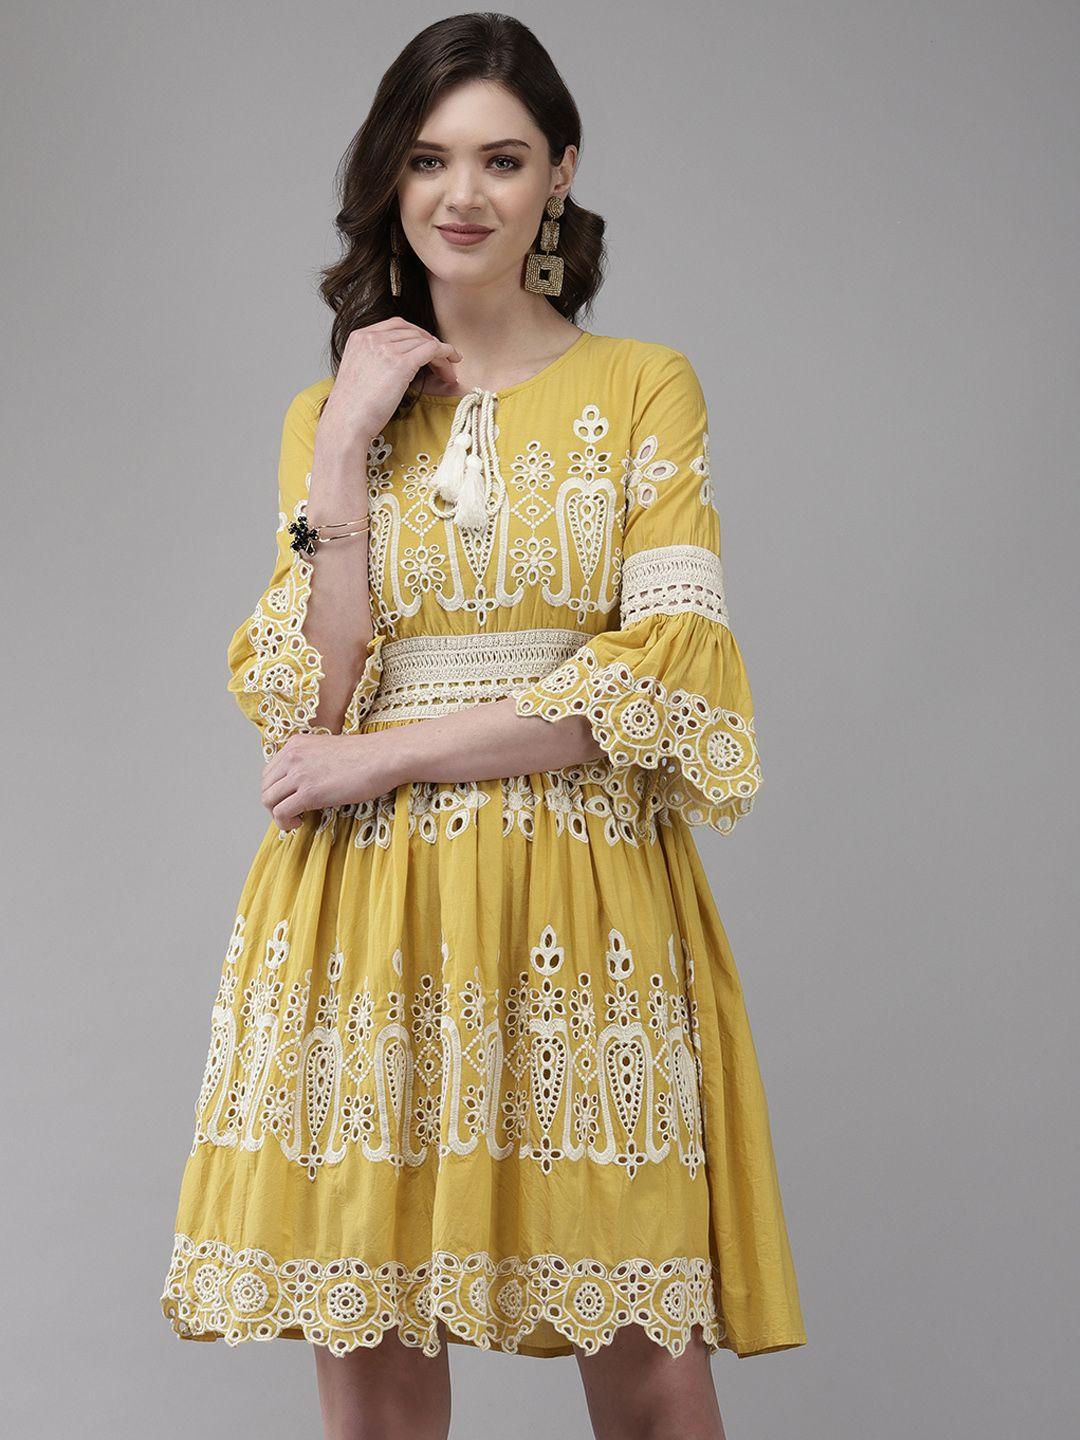 ishin mustard yellow floral embroidered tie-up neck a-line dress